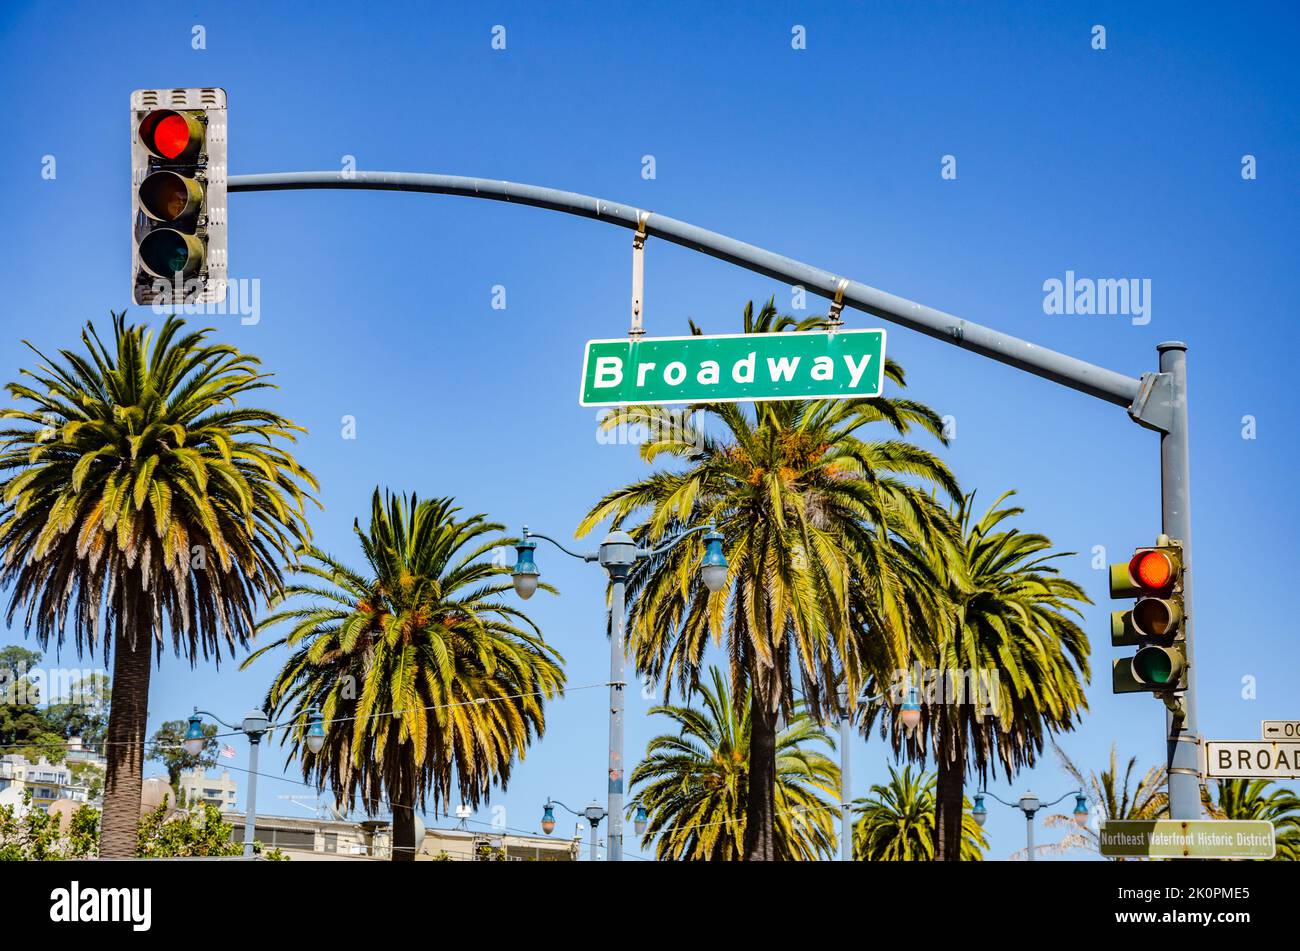 A street sign for Broadway hanging from the crossbar of a traffic light in San Francisco pictured with palm trees and blue sky int he background Stock Photo